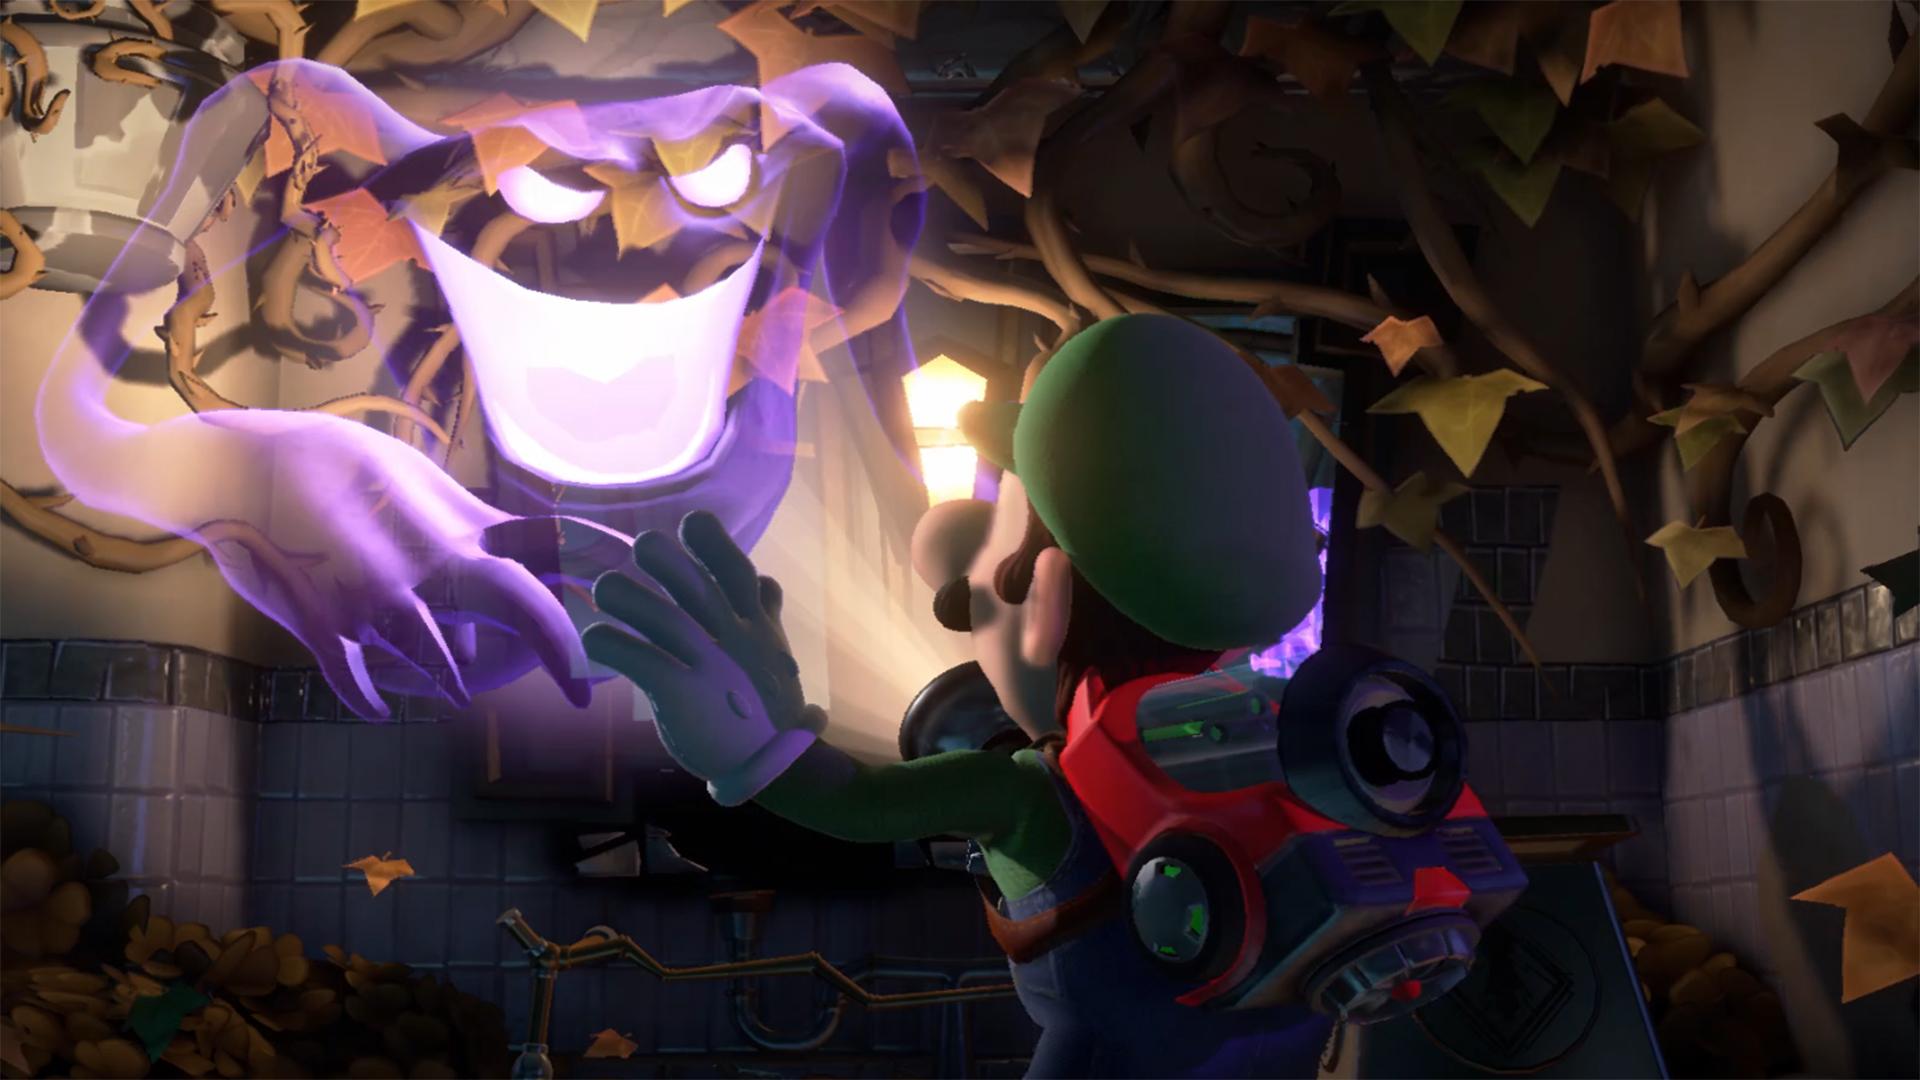 Luigi's Mansion 3 is packed full of ghastly ghosts, charming